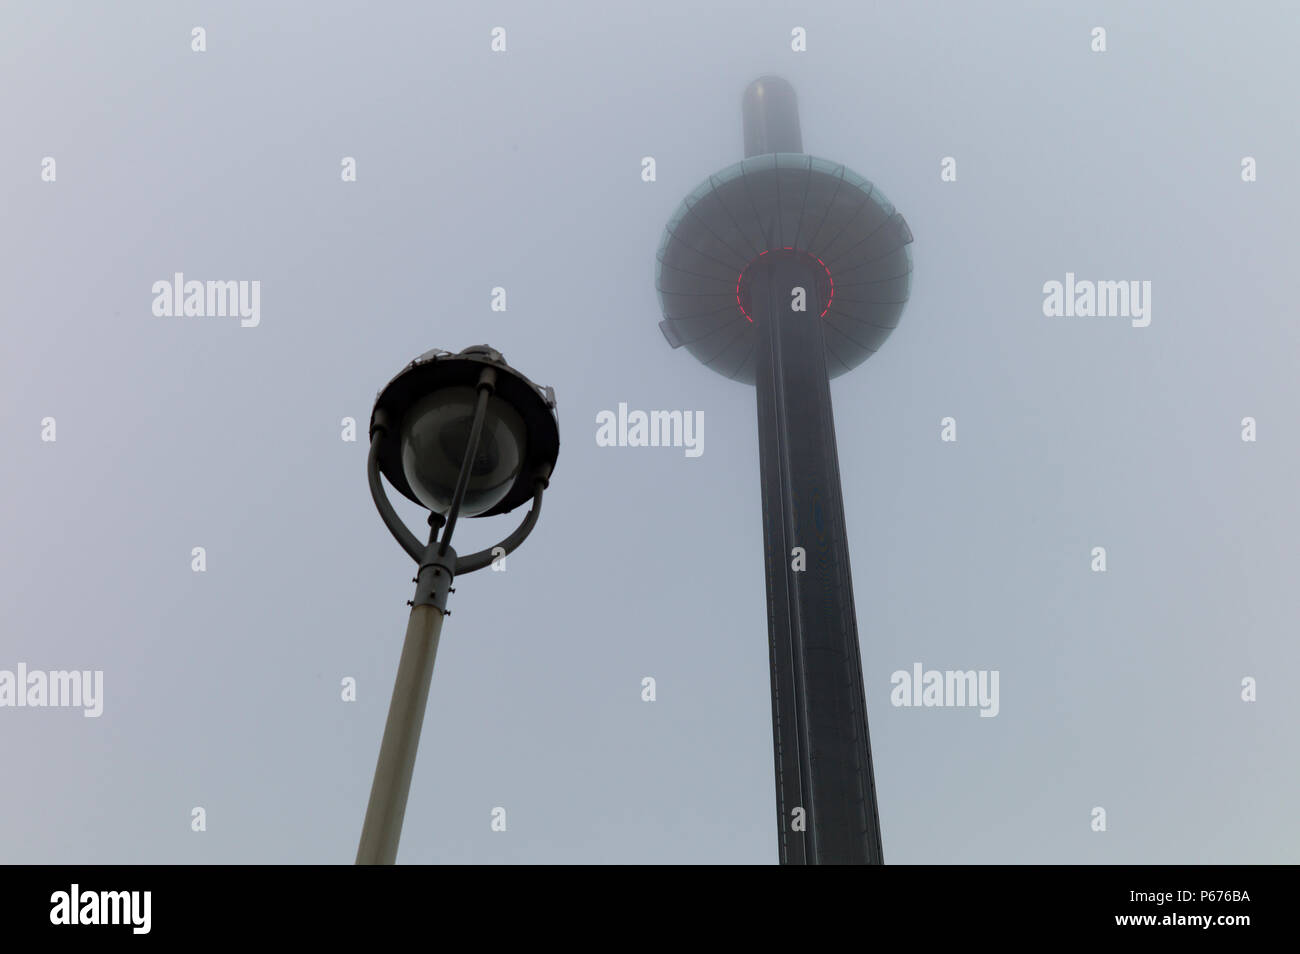 Brighton i360 viewing tower in fog Stock Photo